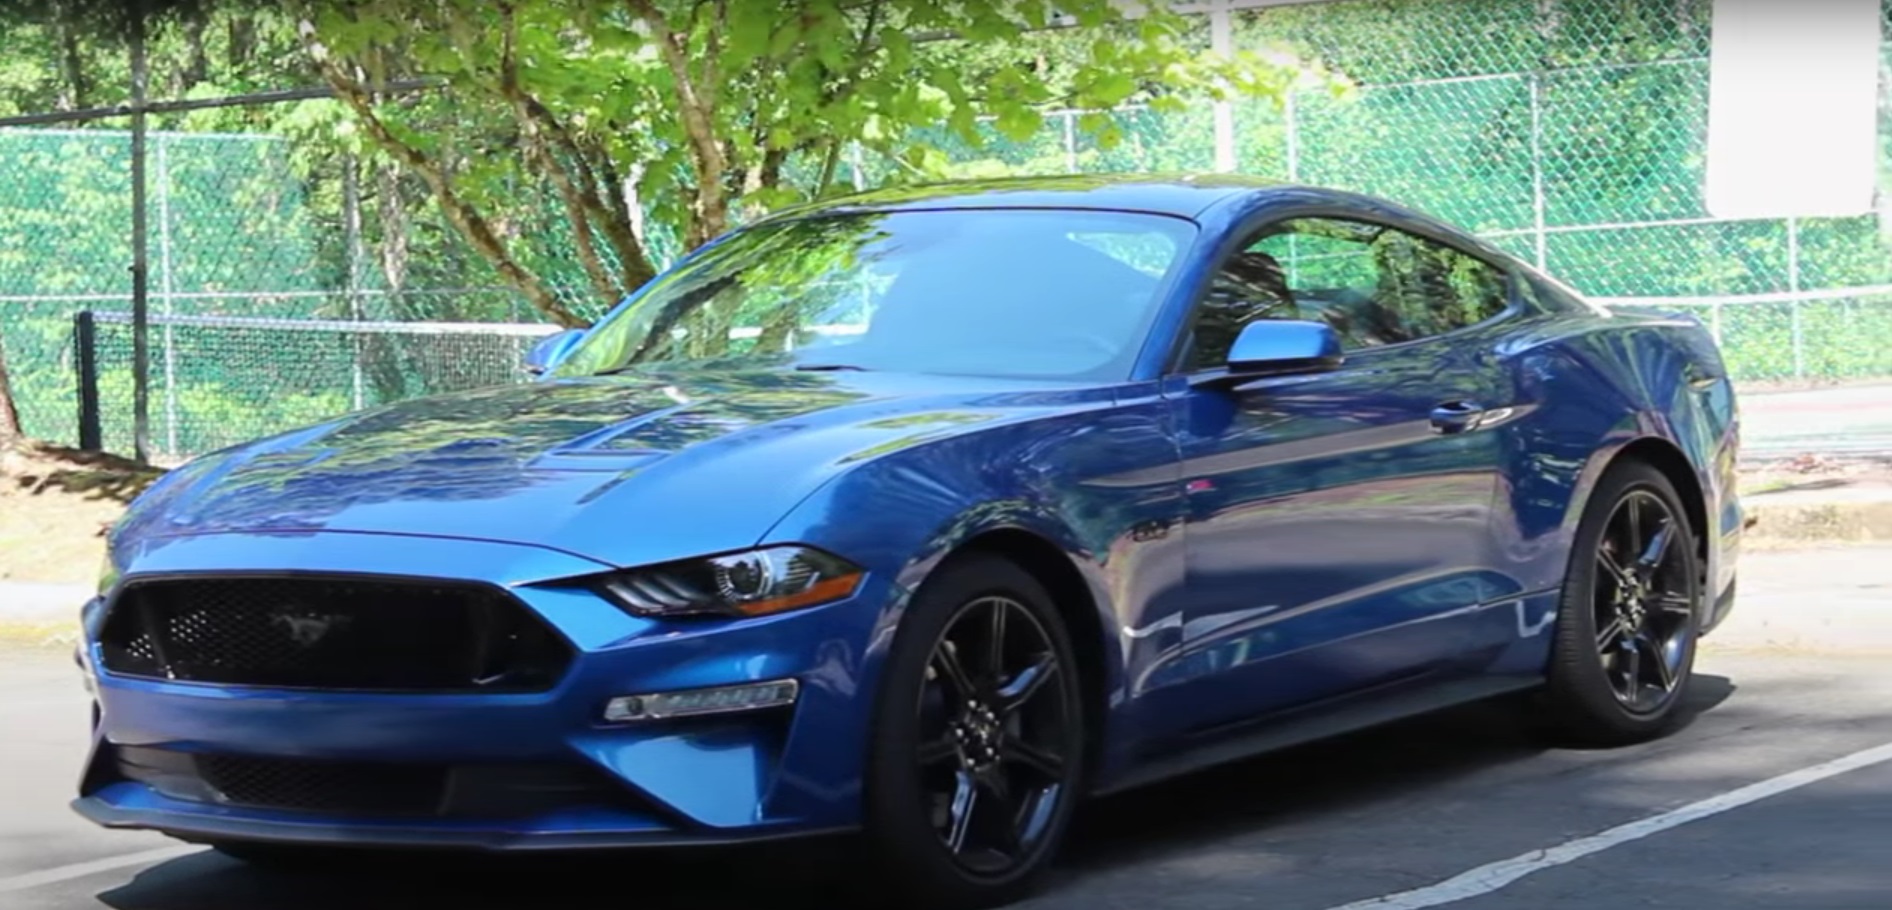 Video: 2018 Ford Mustang GT 10-Speed - Better in Every Way!